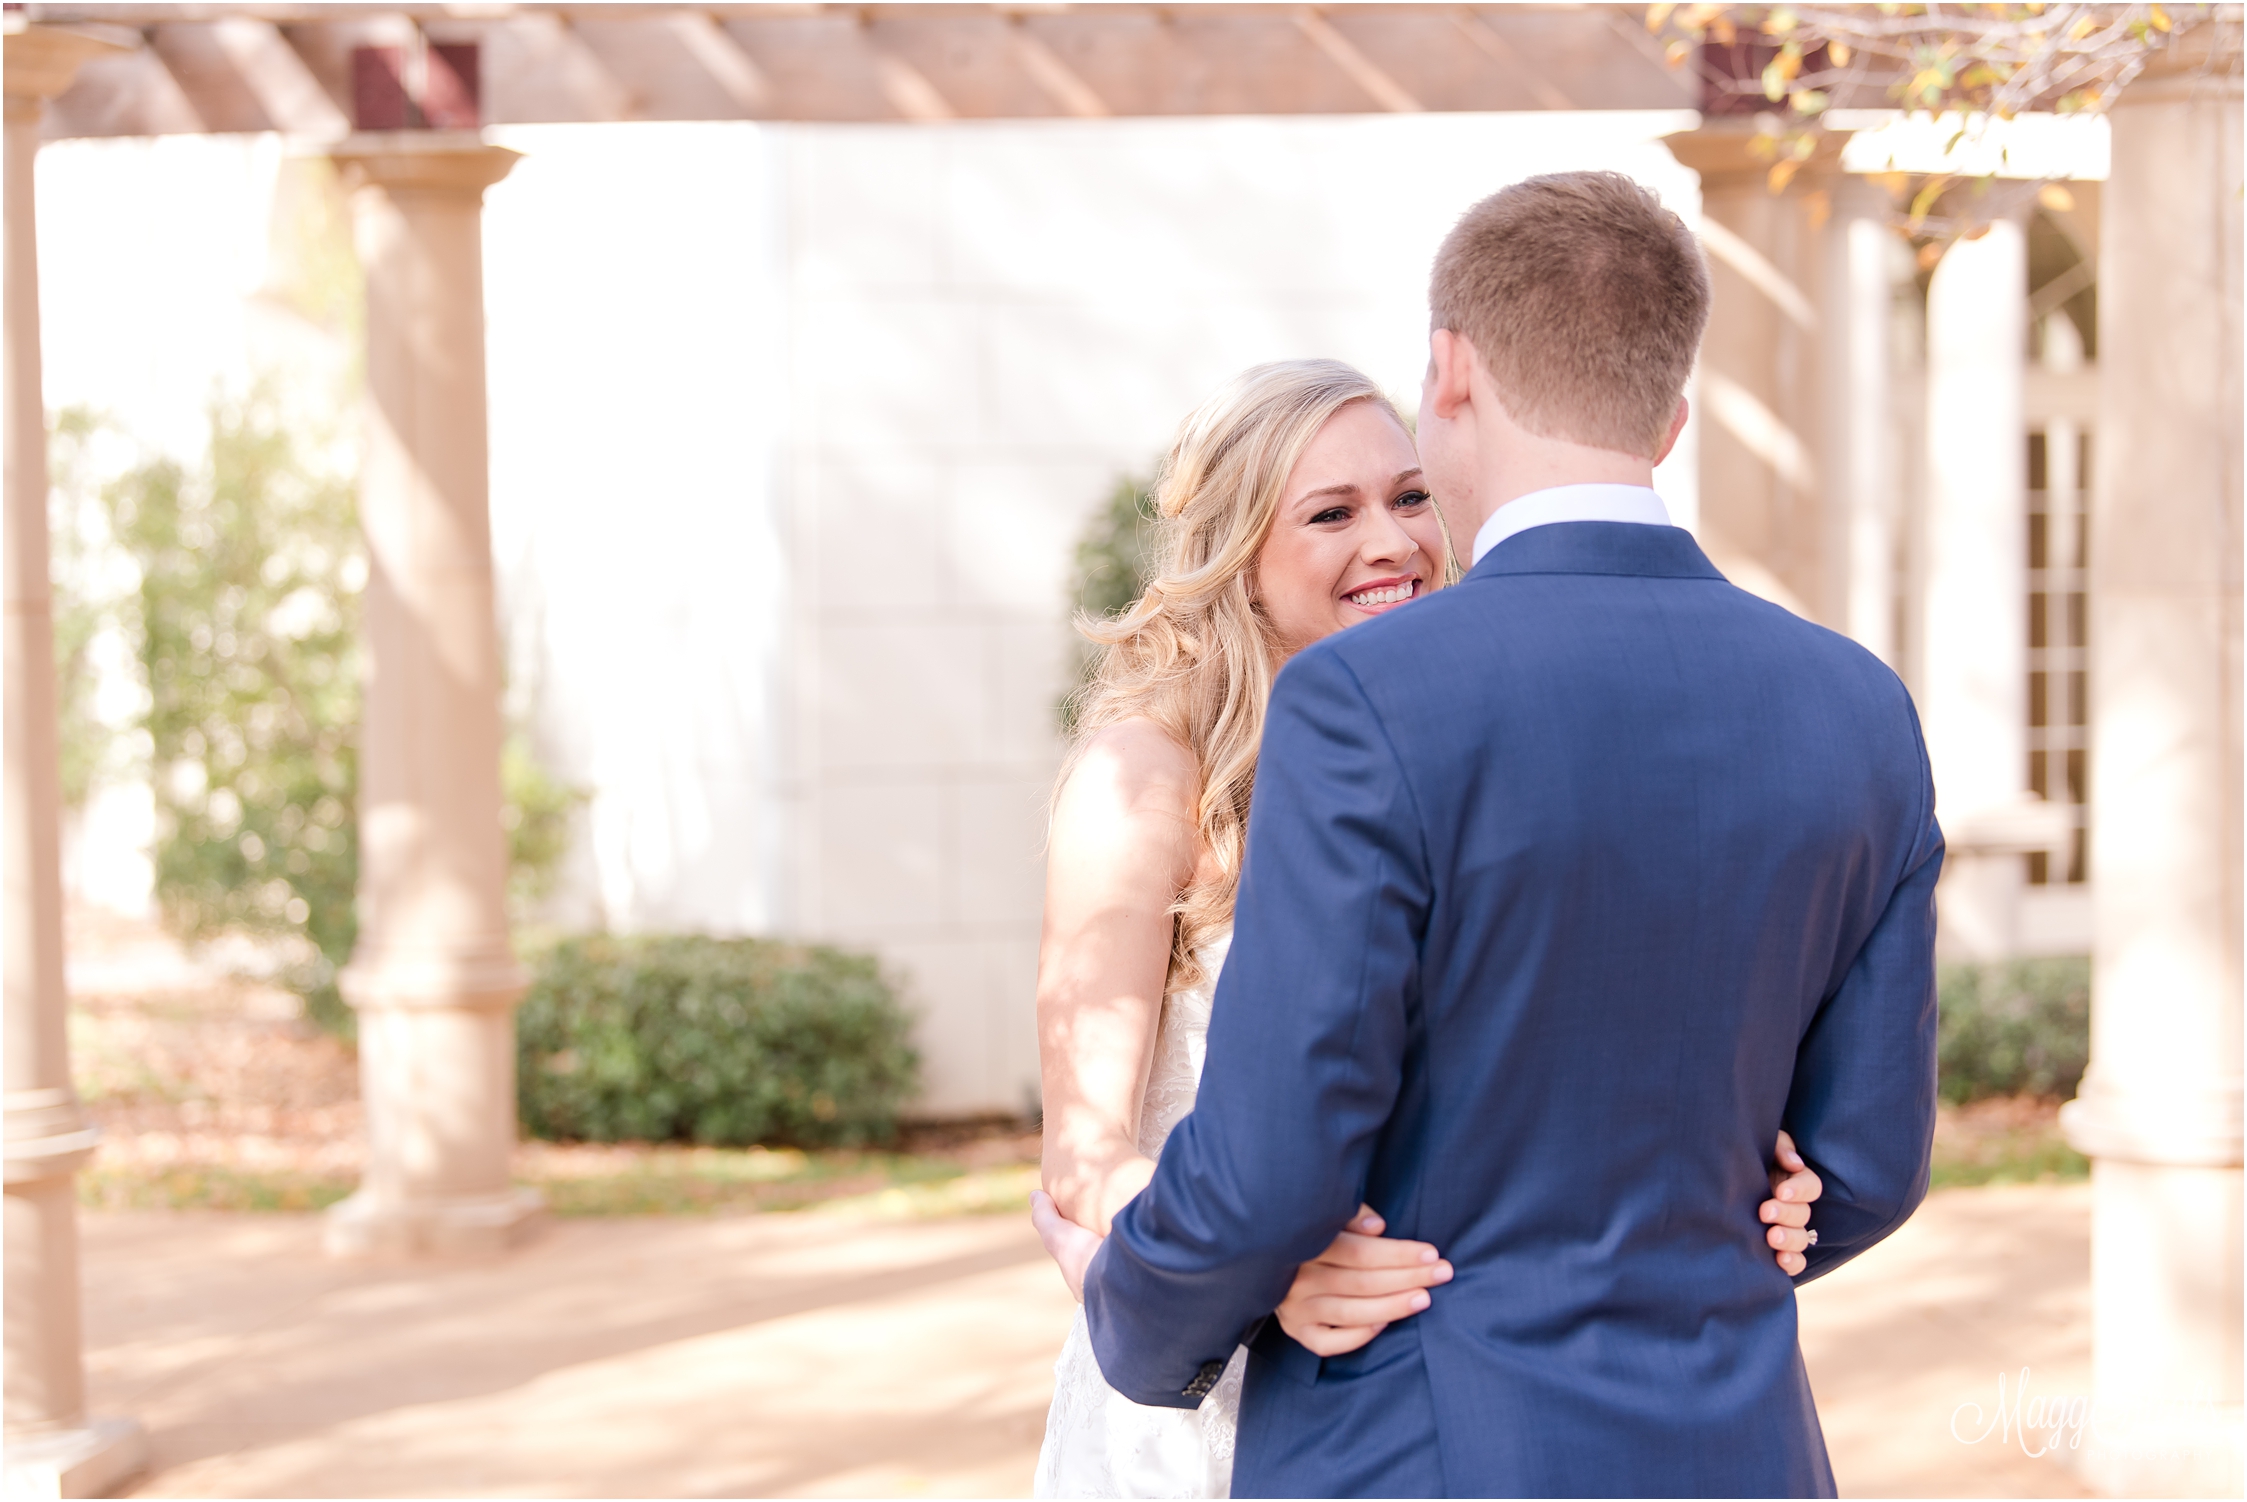 Bridal, Portraits, Bouquet, Ring, Bling, Professional Photography, Professional Photographer, Wedding Photographer, Destination Wedding Photographer, Love, Bride and Groom, Wedding Dress, Ashton Gardens, MaggShots Photography, MaggShots, Happy, Family, Kiss, Smile, First Look